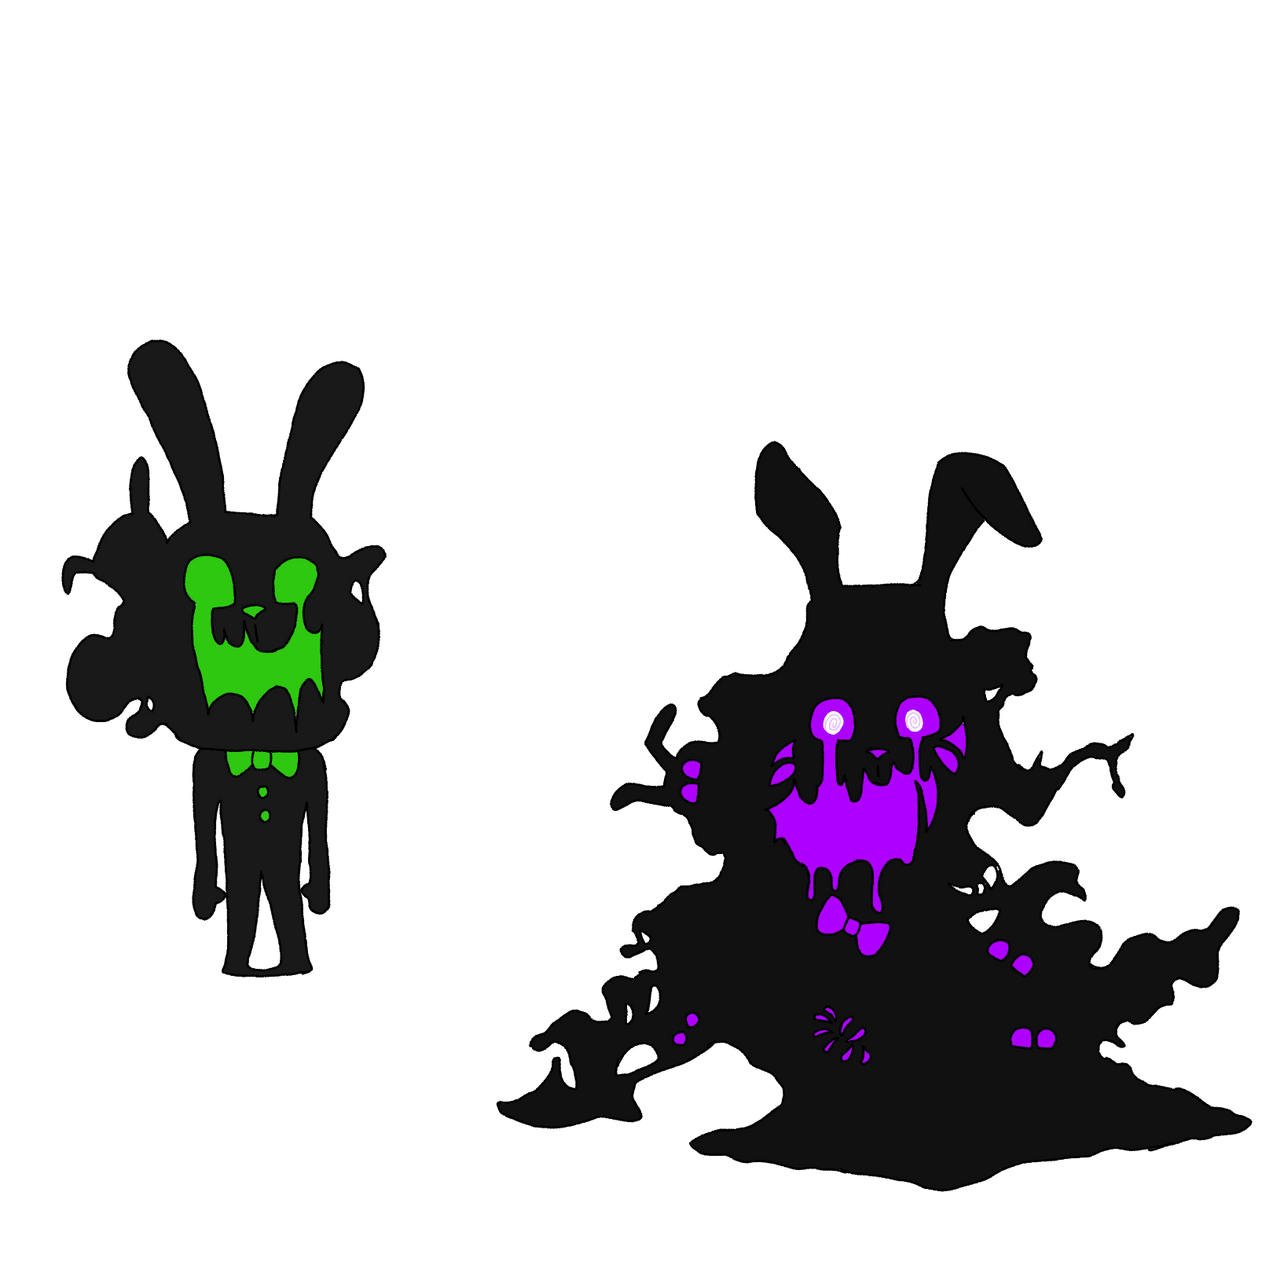 Withered fnaf plus foxy by TimetoGetCreative0 on DeviantArt